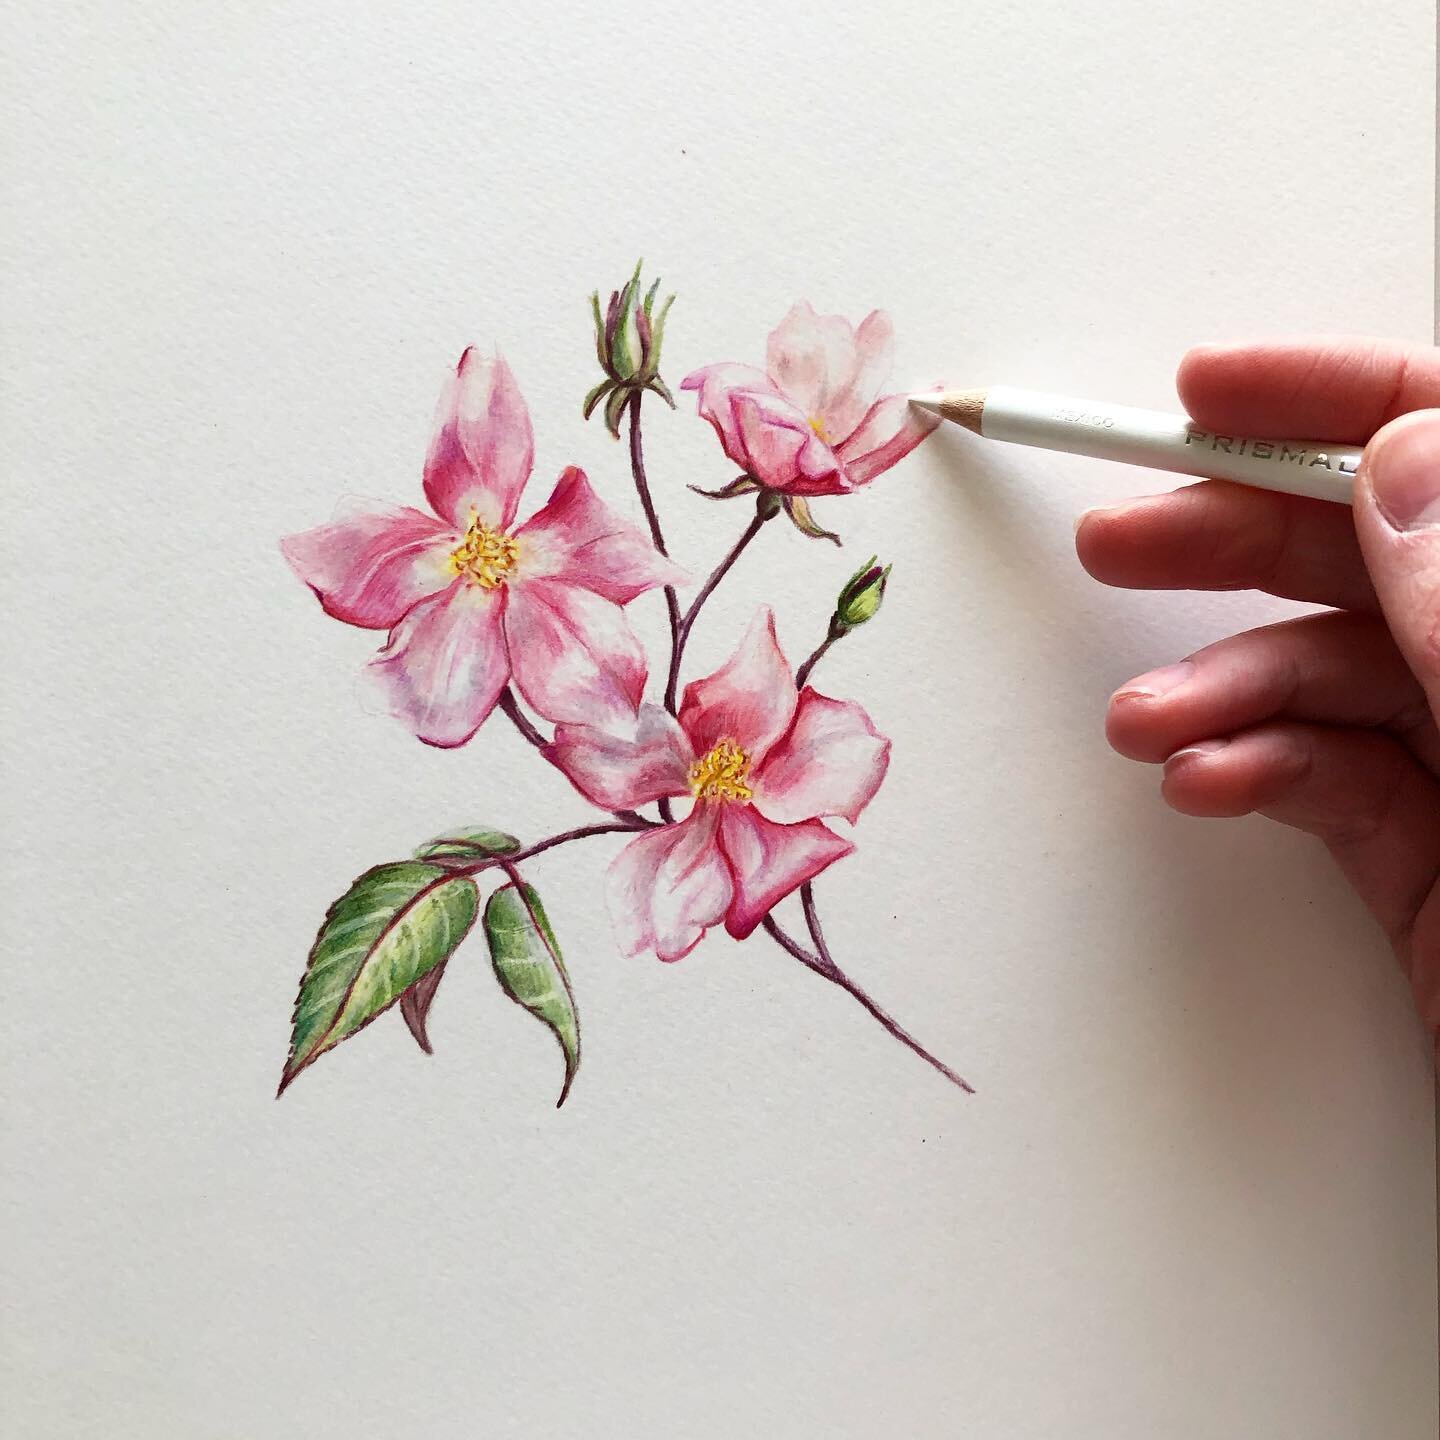 March at last! Looking forward to the first signs of Spring 🌸
.
.
#art #drawing #pen #pencil #linedrawing #flower #flora #rose #march #spring #fabercastell #prismacolor #carandache #dalerrowney #herbariumvitae #phoebeatkey